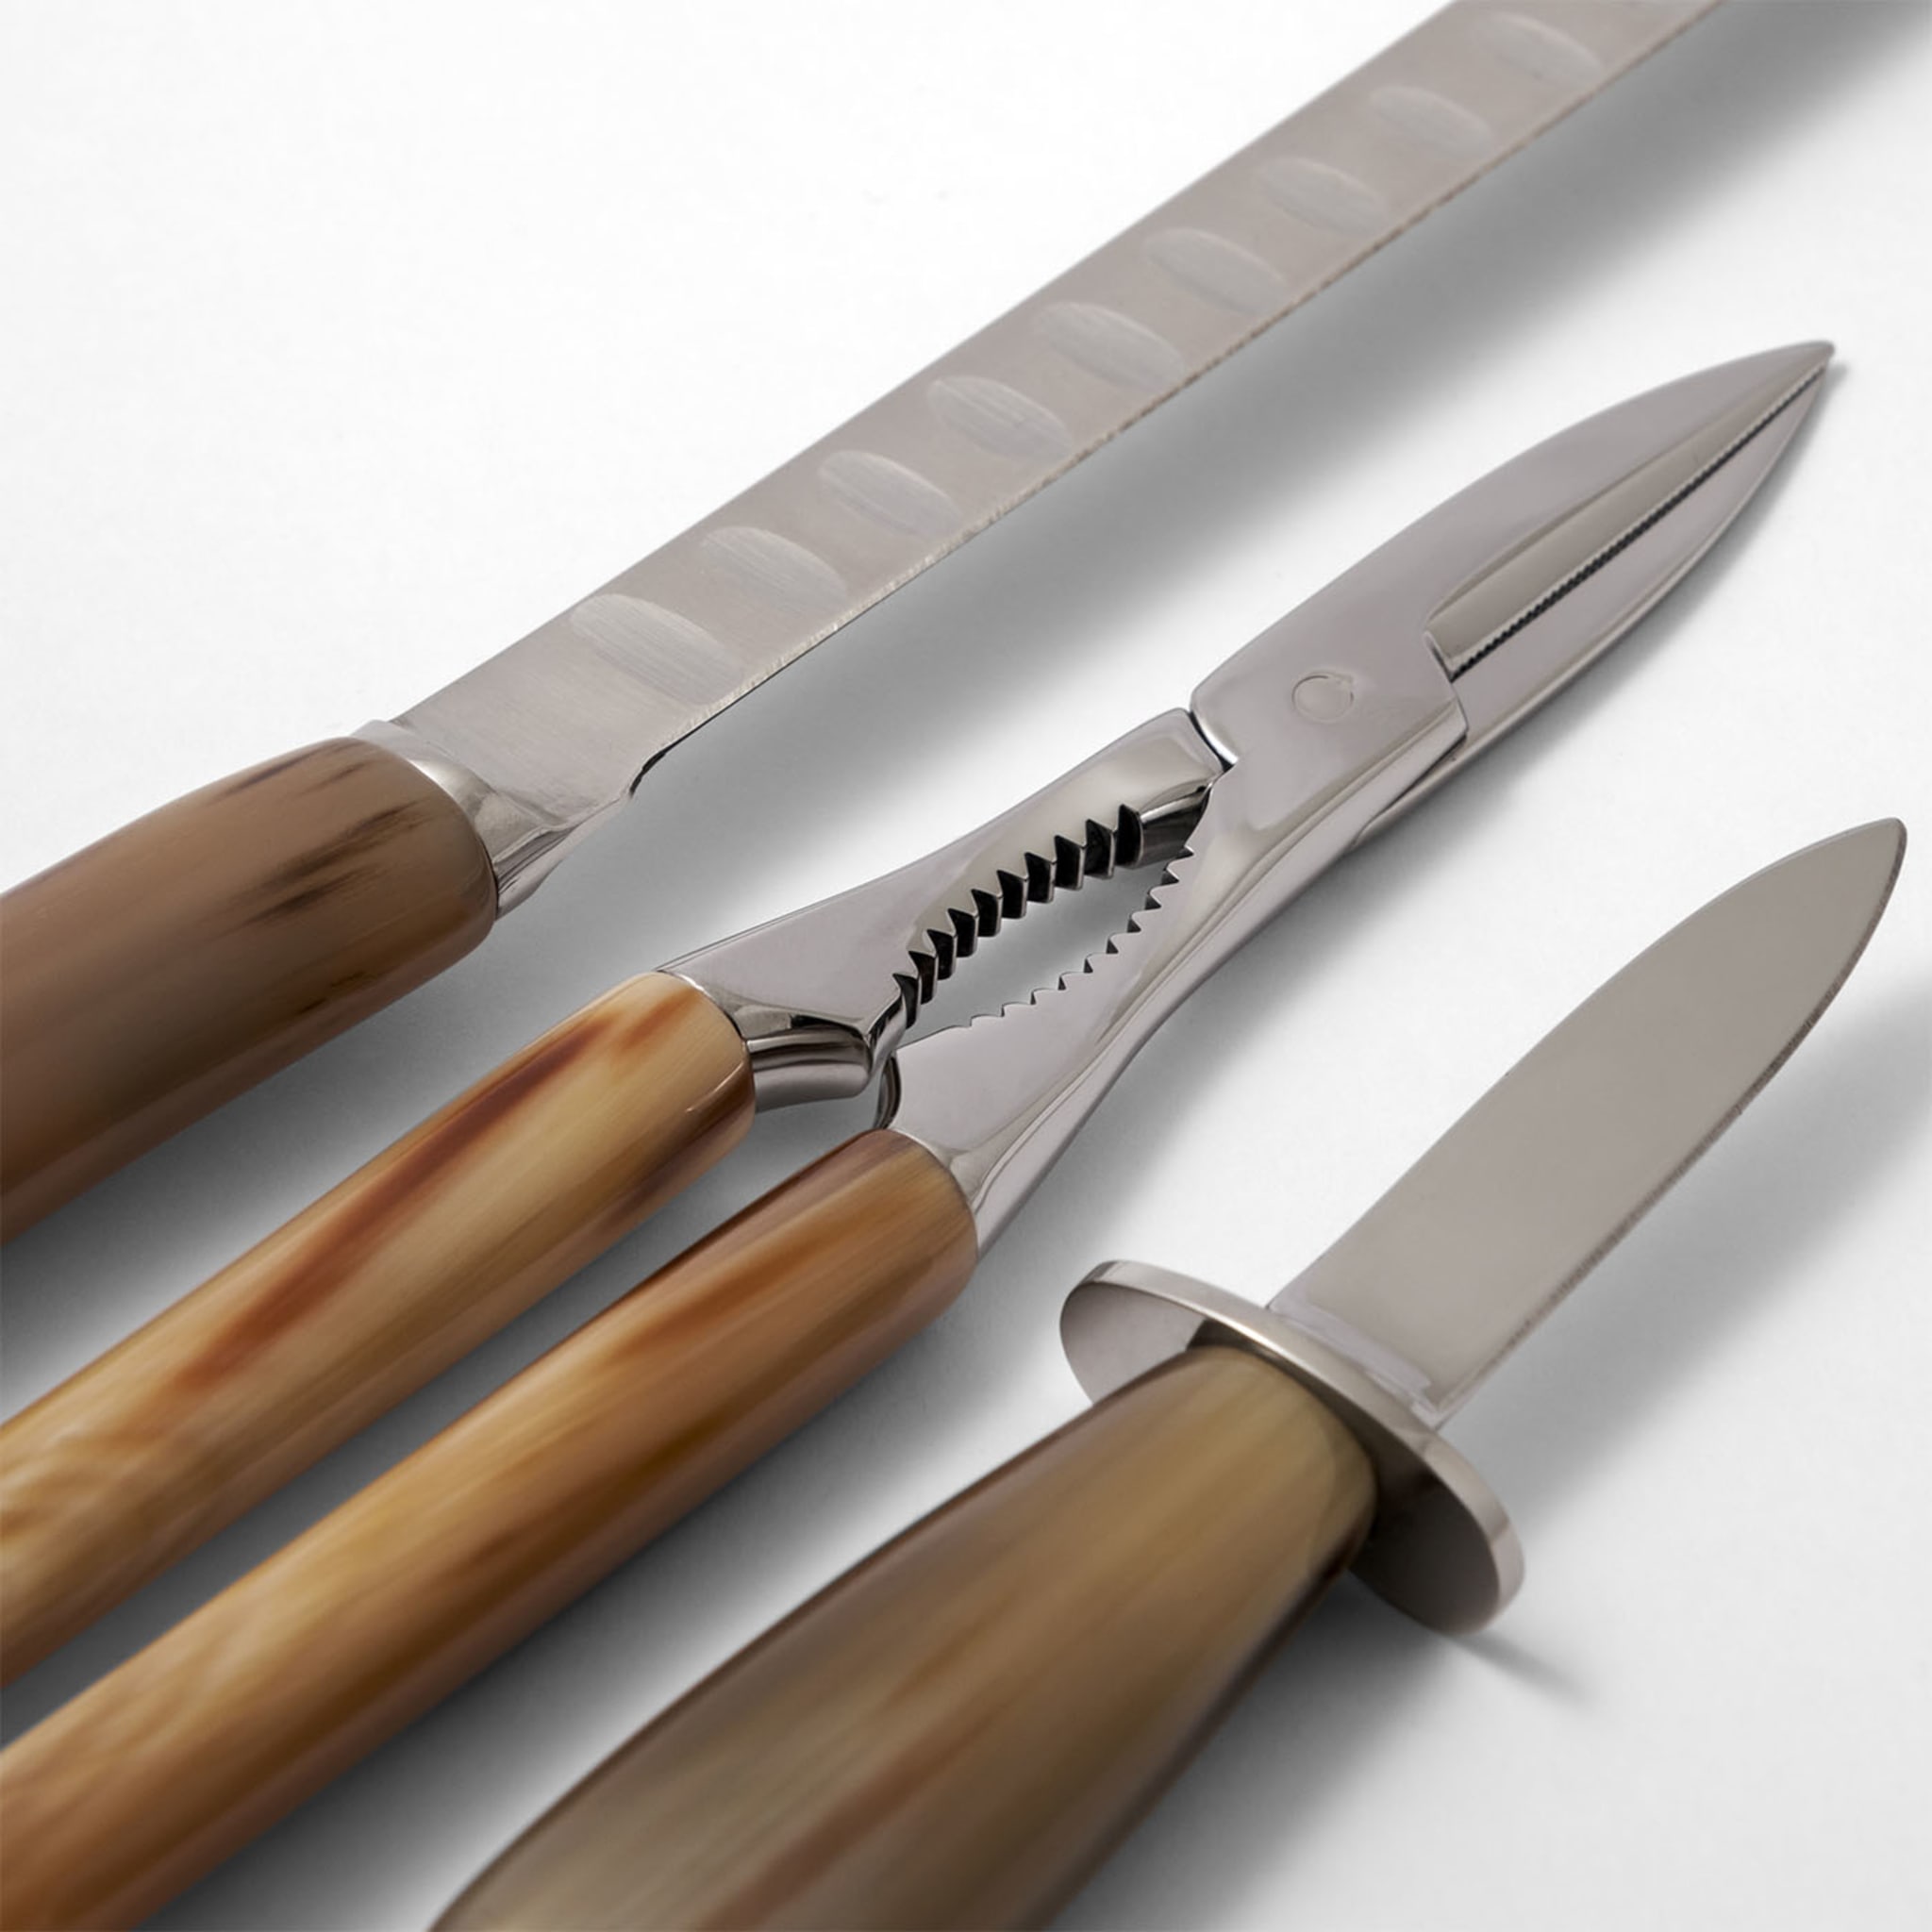 Fish and Shellfish Cutlery Set in Natural Horn - Alternative view 1